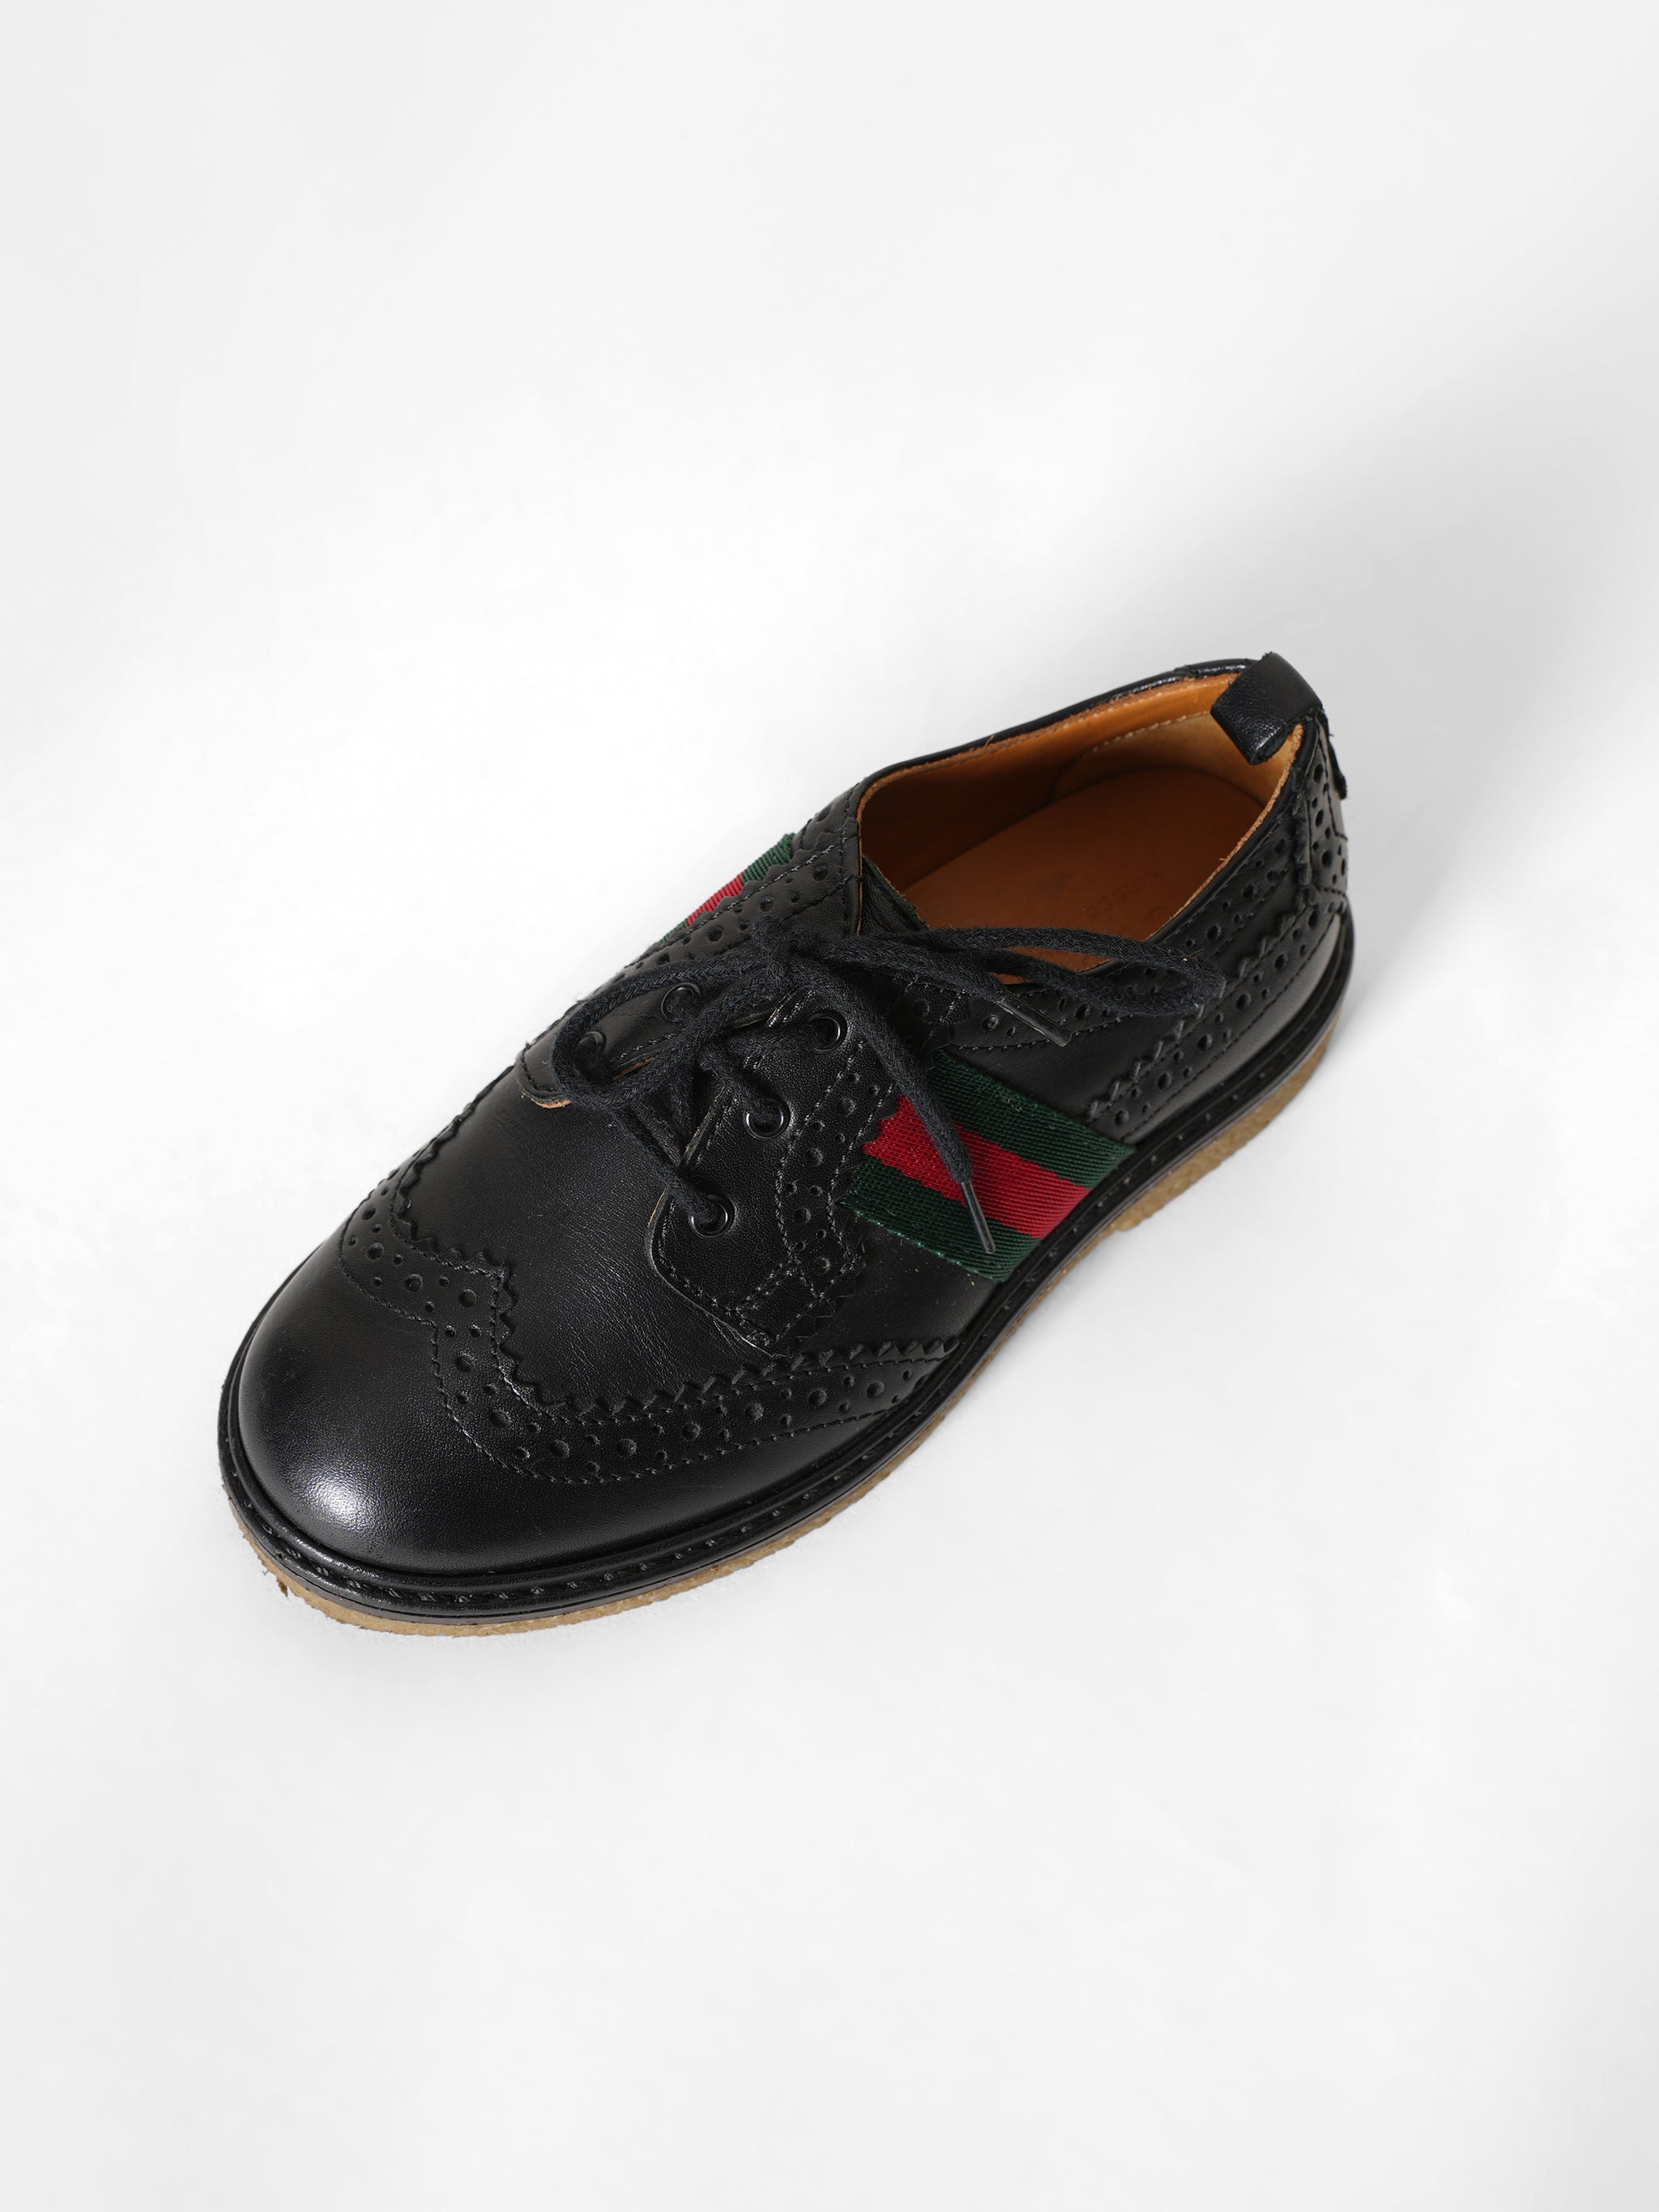 Gucci Strand Wingtip Oxford Shoes